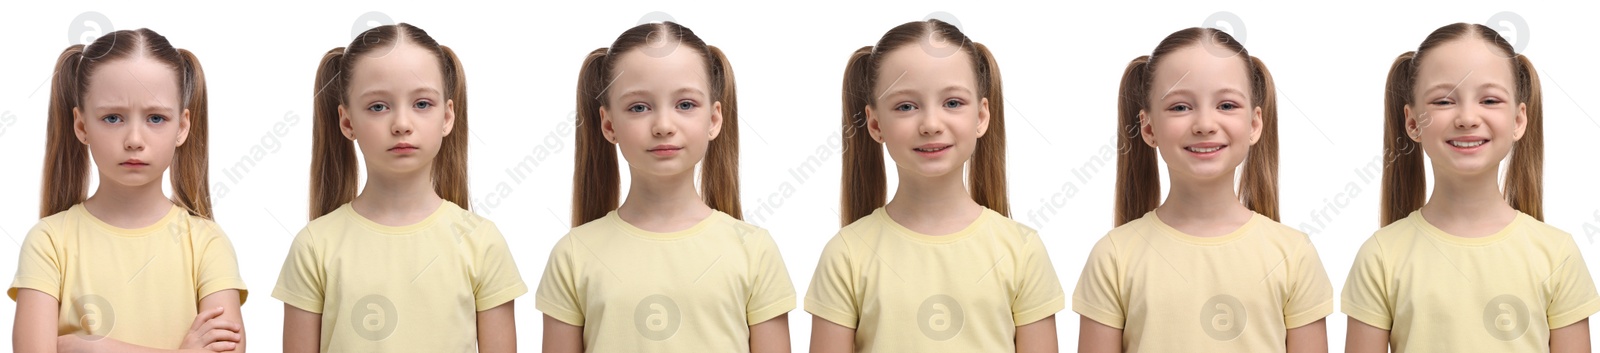 Image of Girl showing different emotions on white background, collage of photos